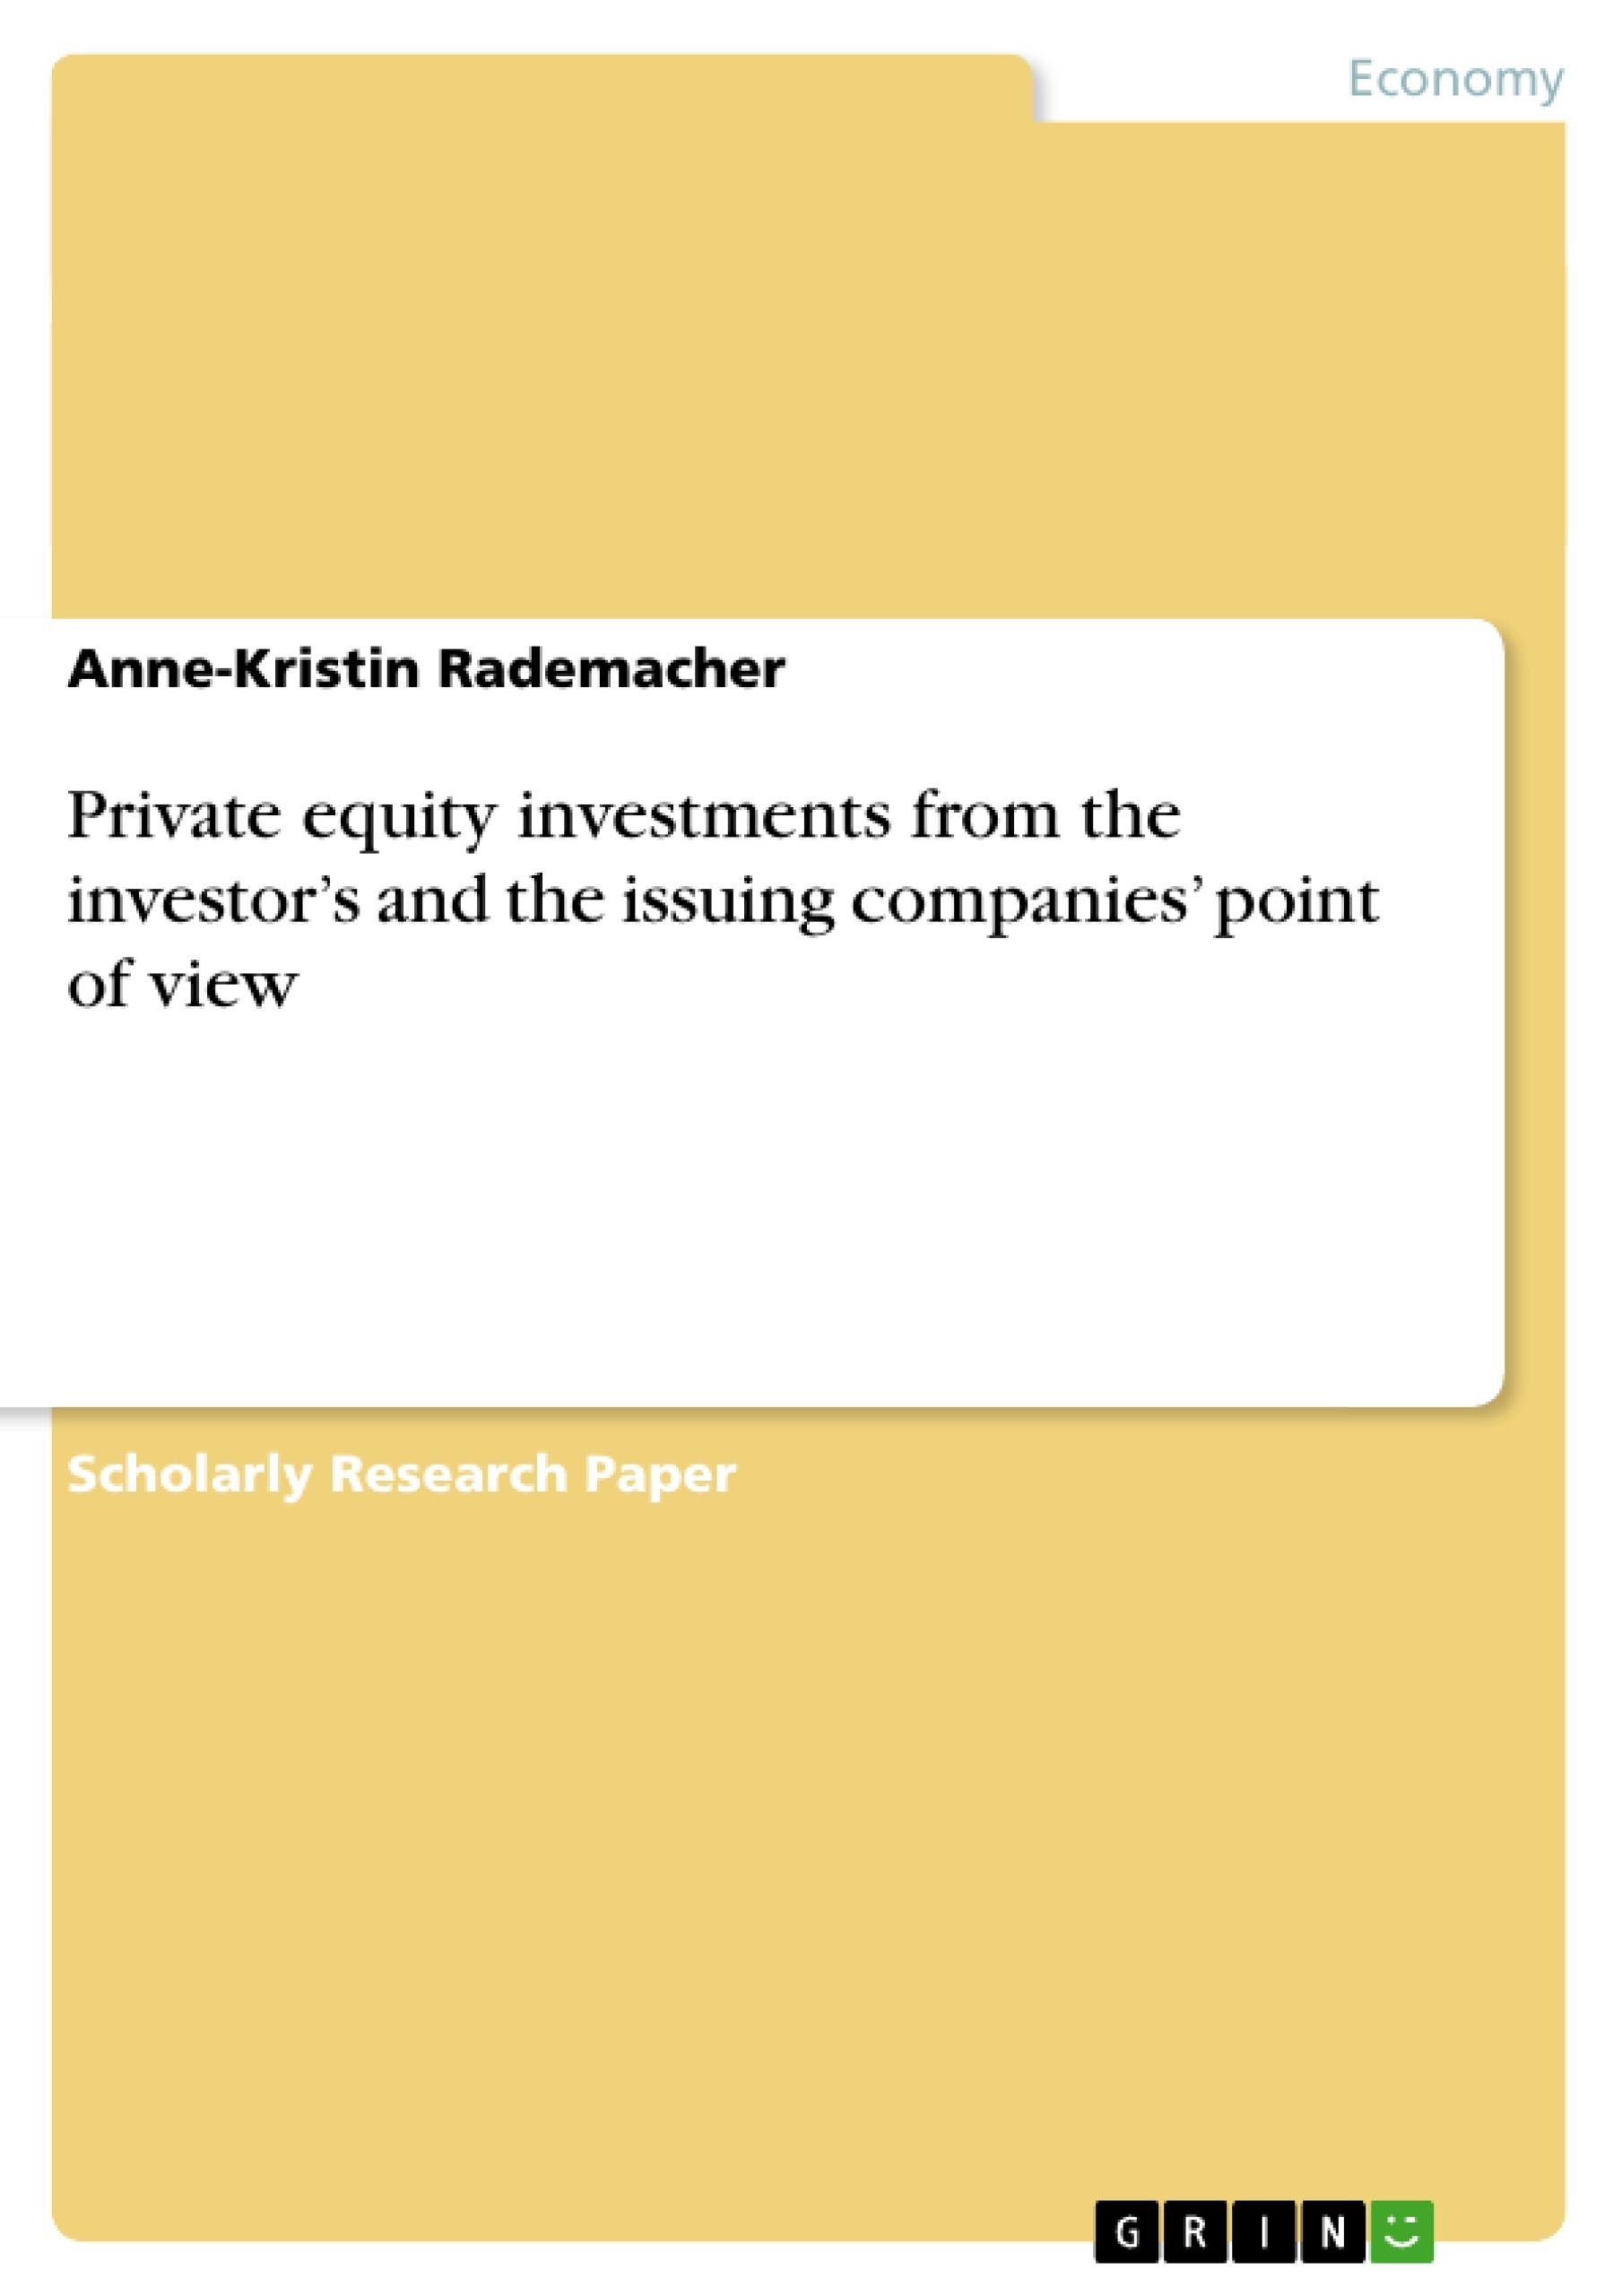 Title: Private equity investments from the investor’s and the issuing companies’ point of view